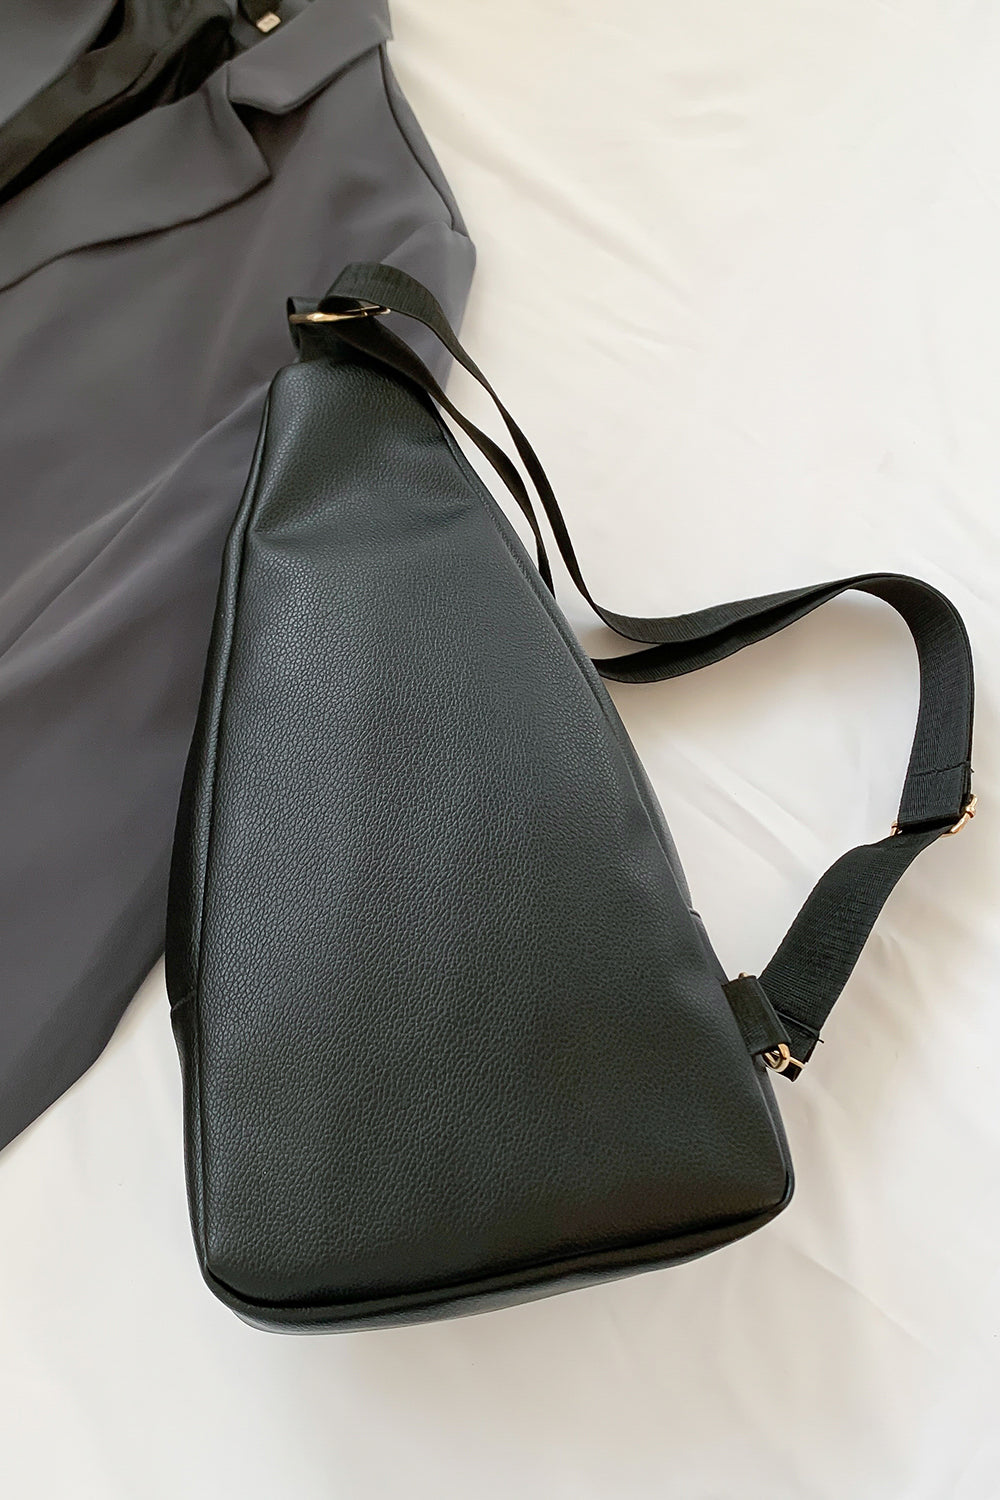 The Evelyn Leather Sling Bag